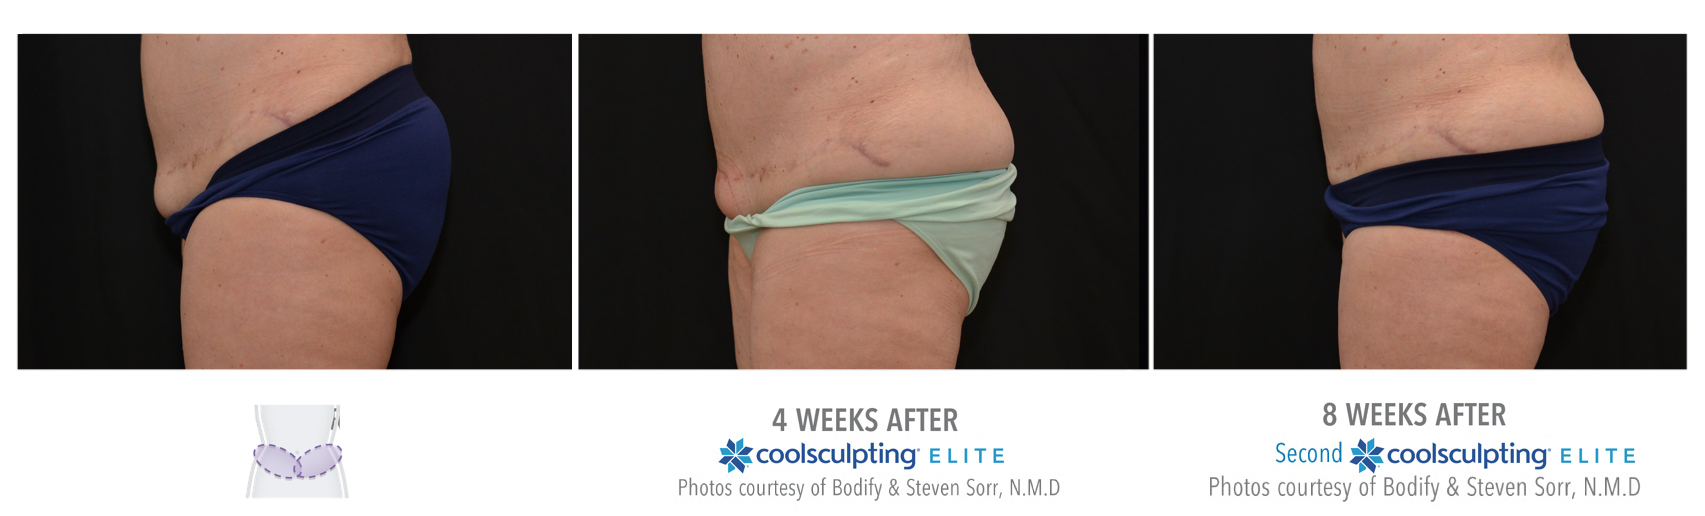 Coolsculpting Treatment Results on a Female Lower Abs | Melindas Medical Spa & Salon in North Myrtle Beach, SC